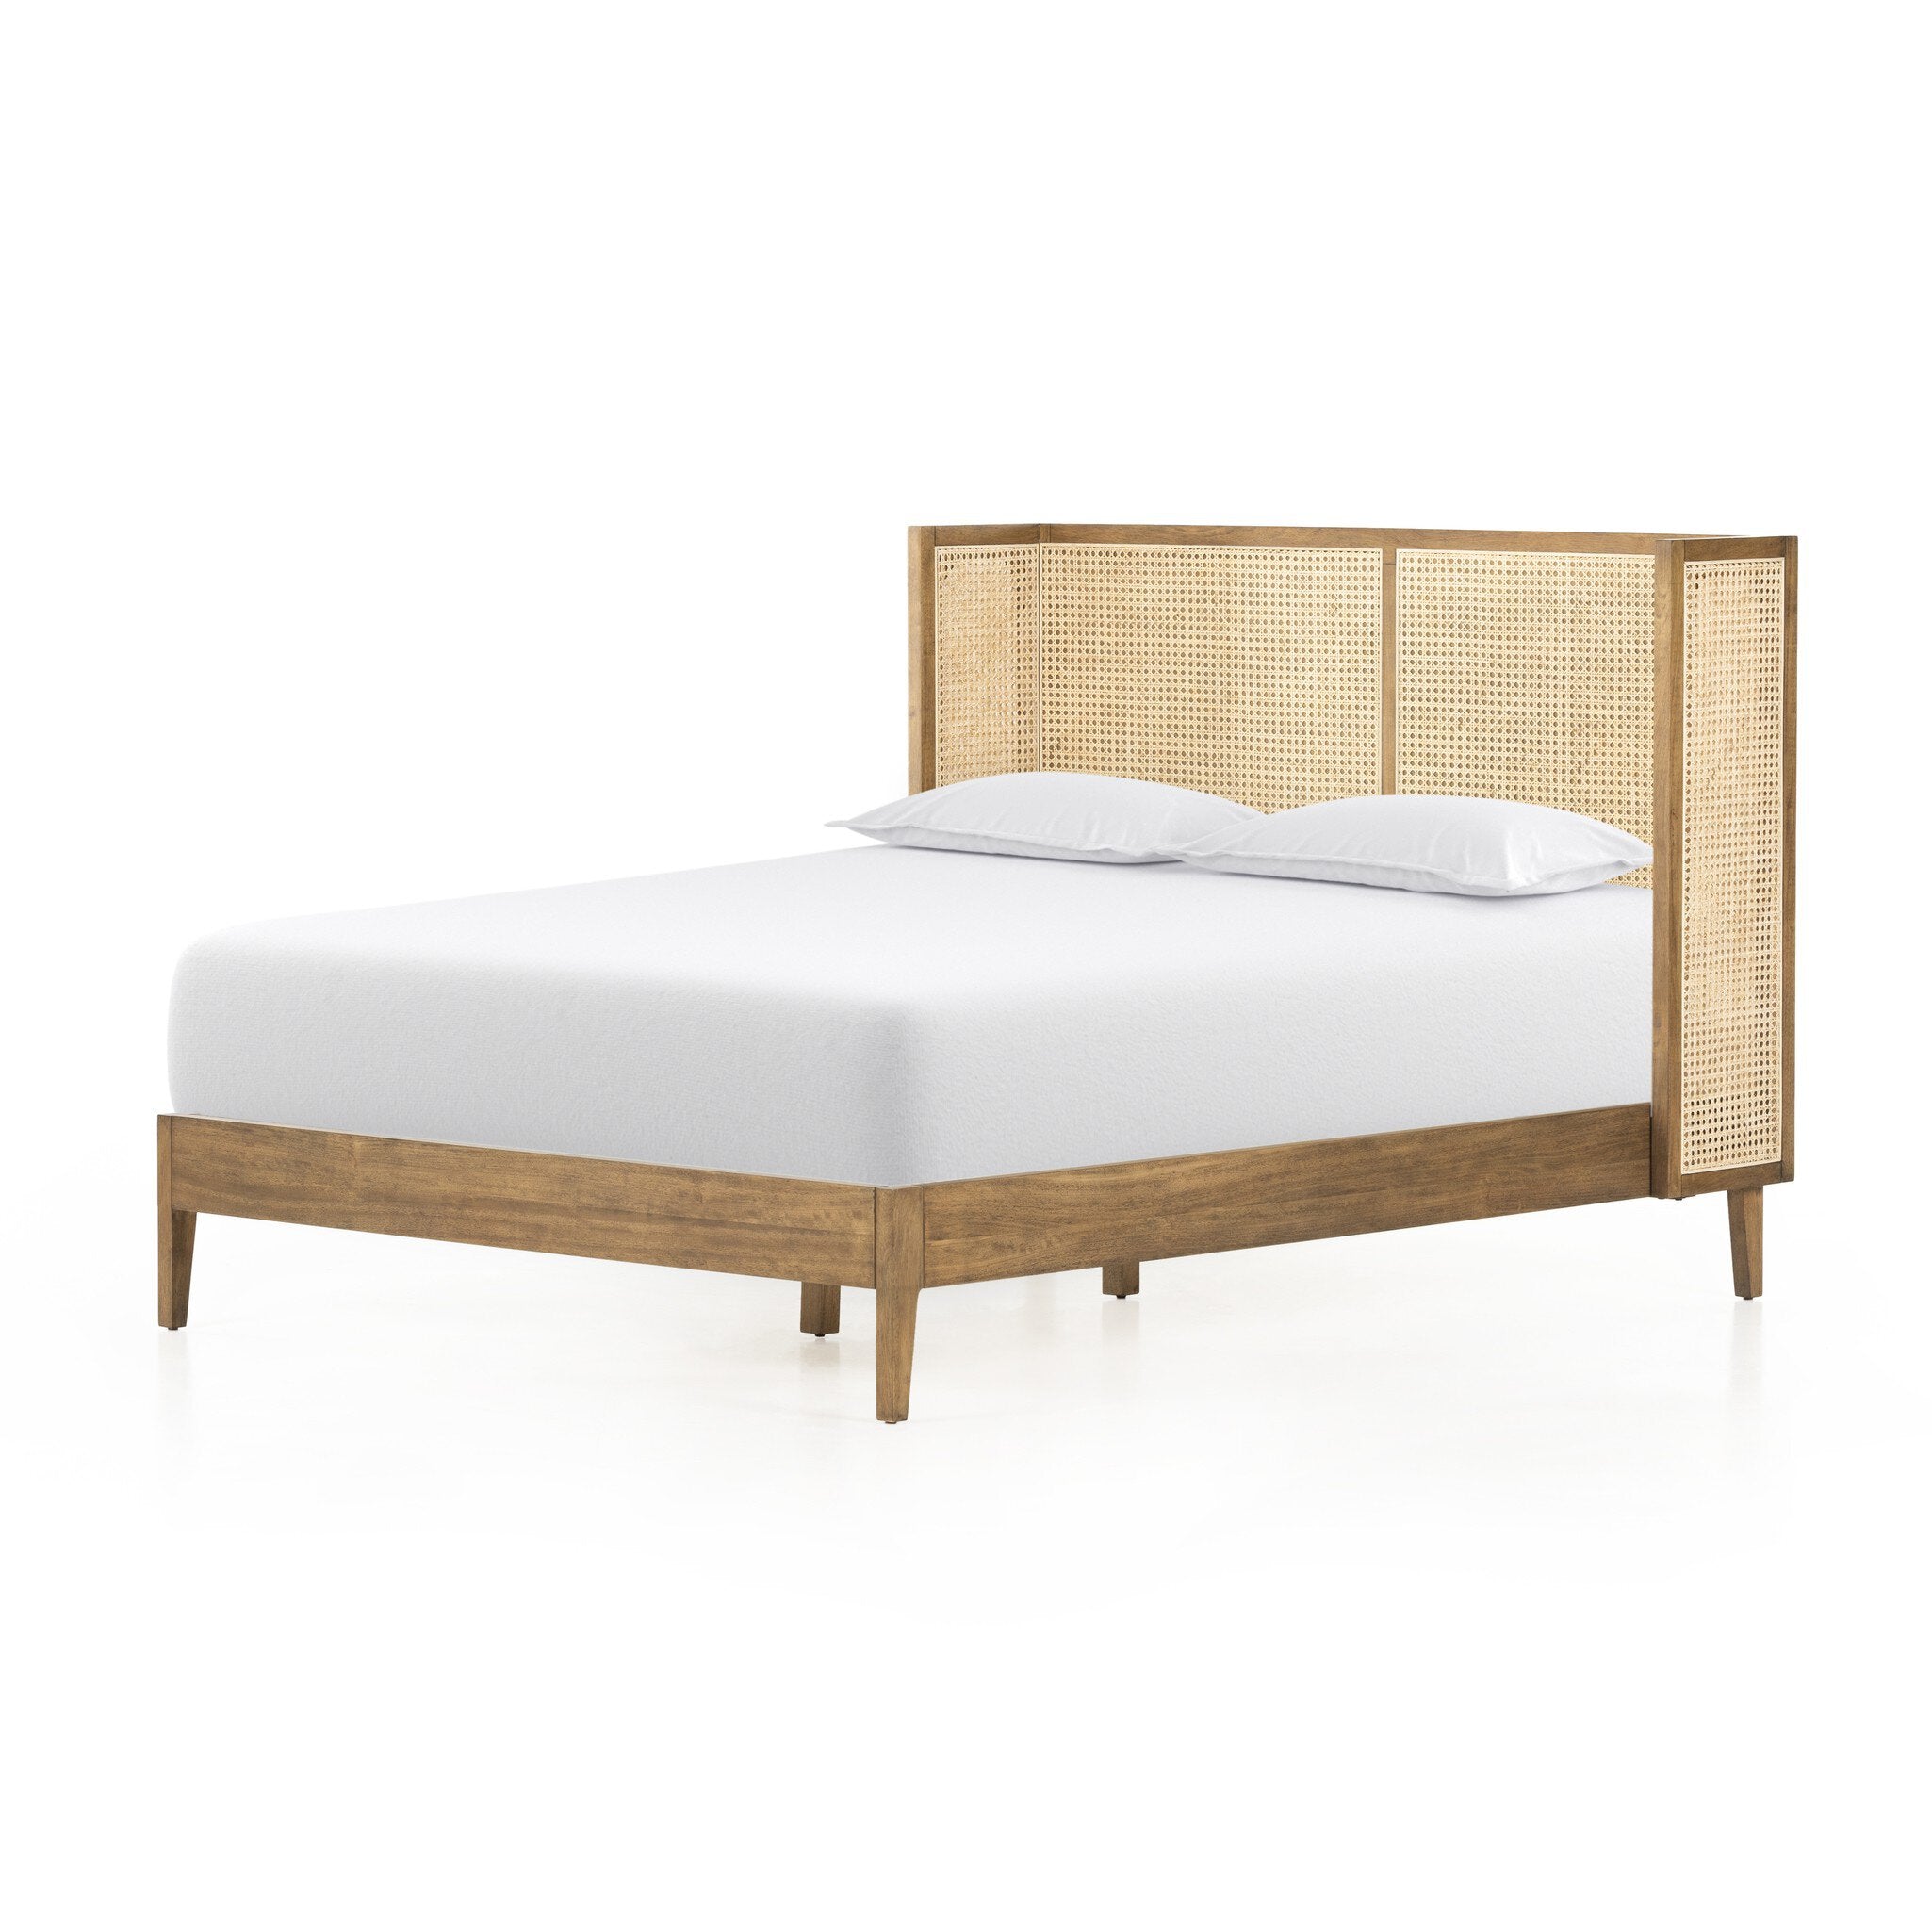 Antonia Cane Bed - Toasted Parawood Veneer